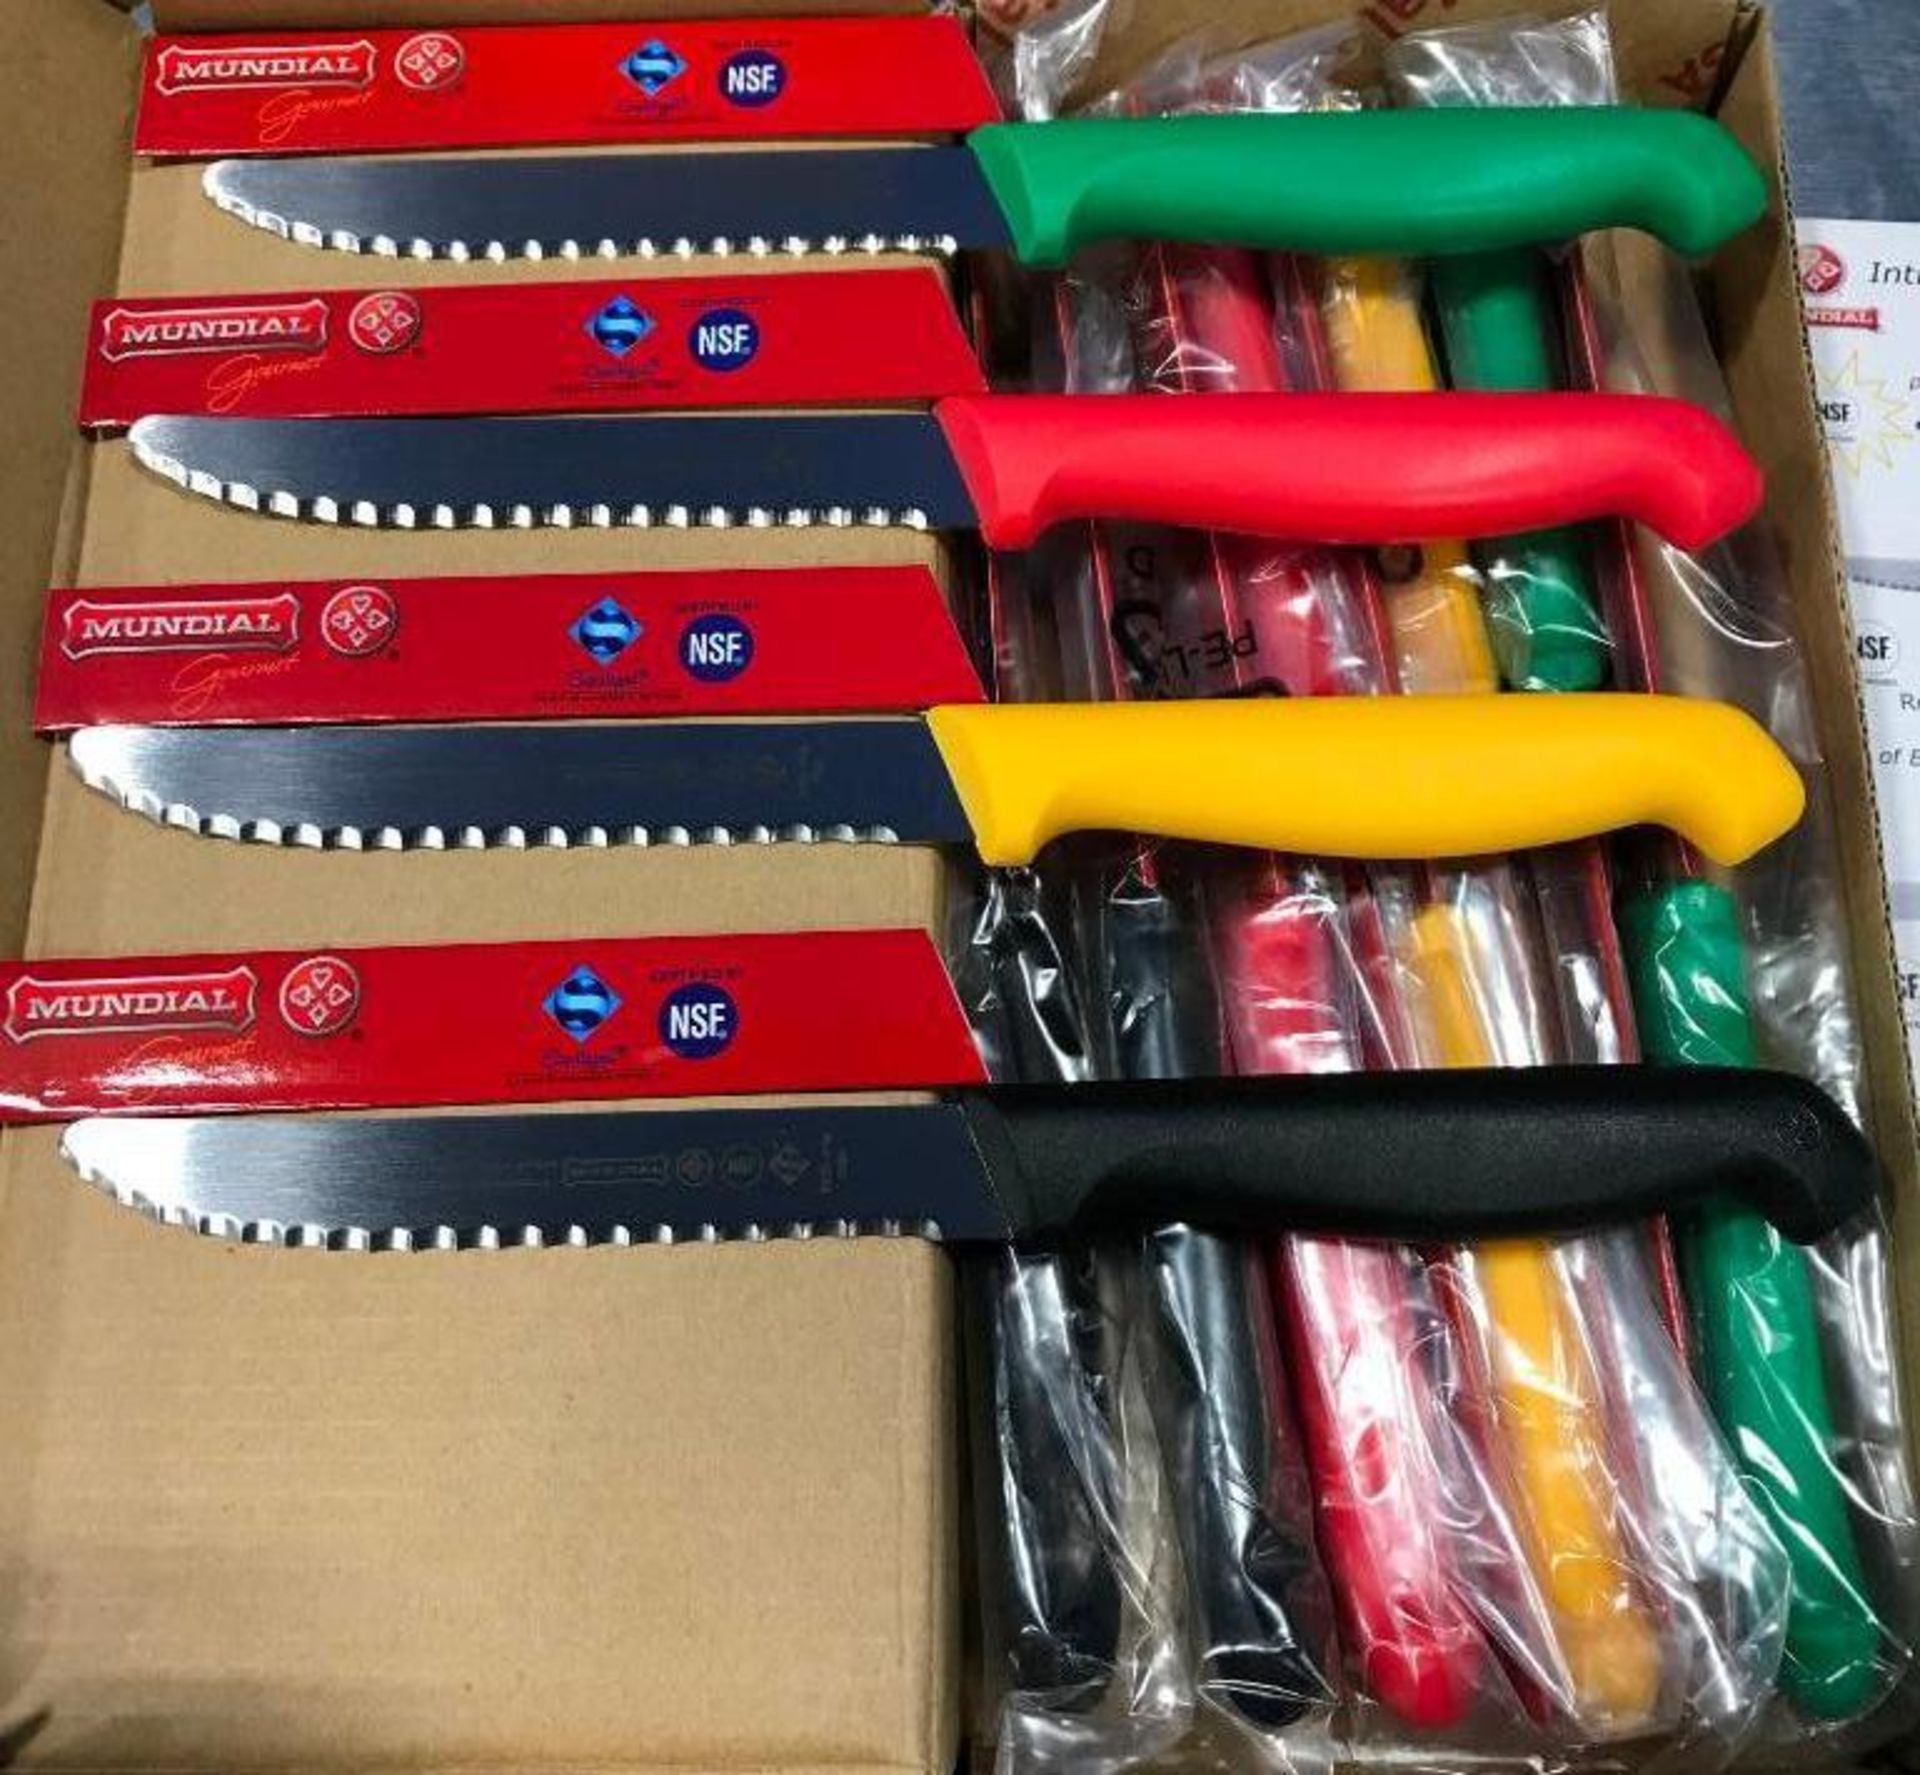 MUNDIAL 4.25" ROUNDED TIP UTILITY KNIFE - LOT OF 12 - 6629-4 1/4 - NEW - Image 4 of 7